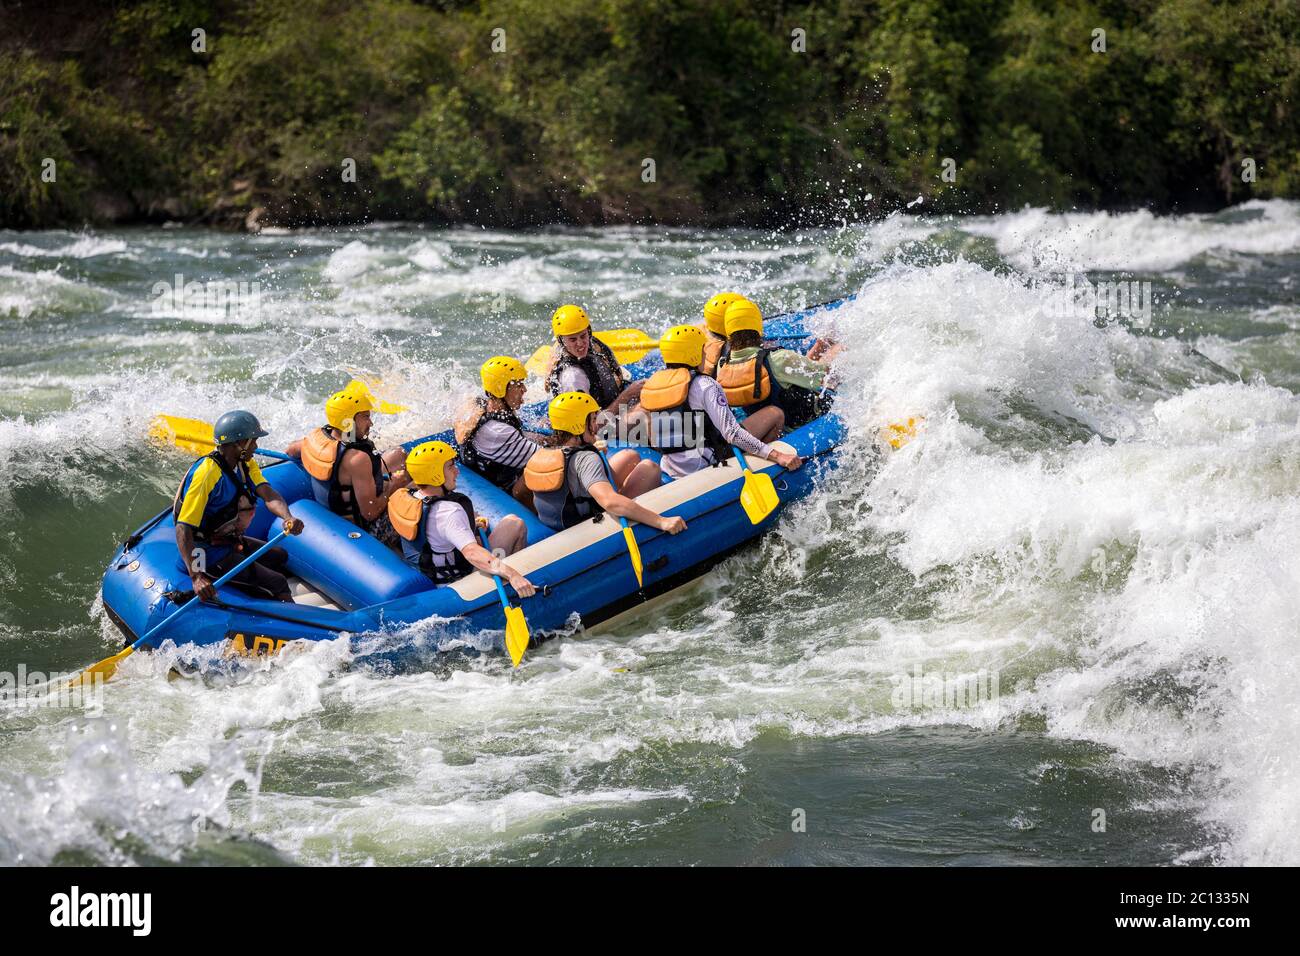 Whitewater rafting expedition on the river Nile near Jinja, Uganda, Africa Stock Photo